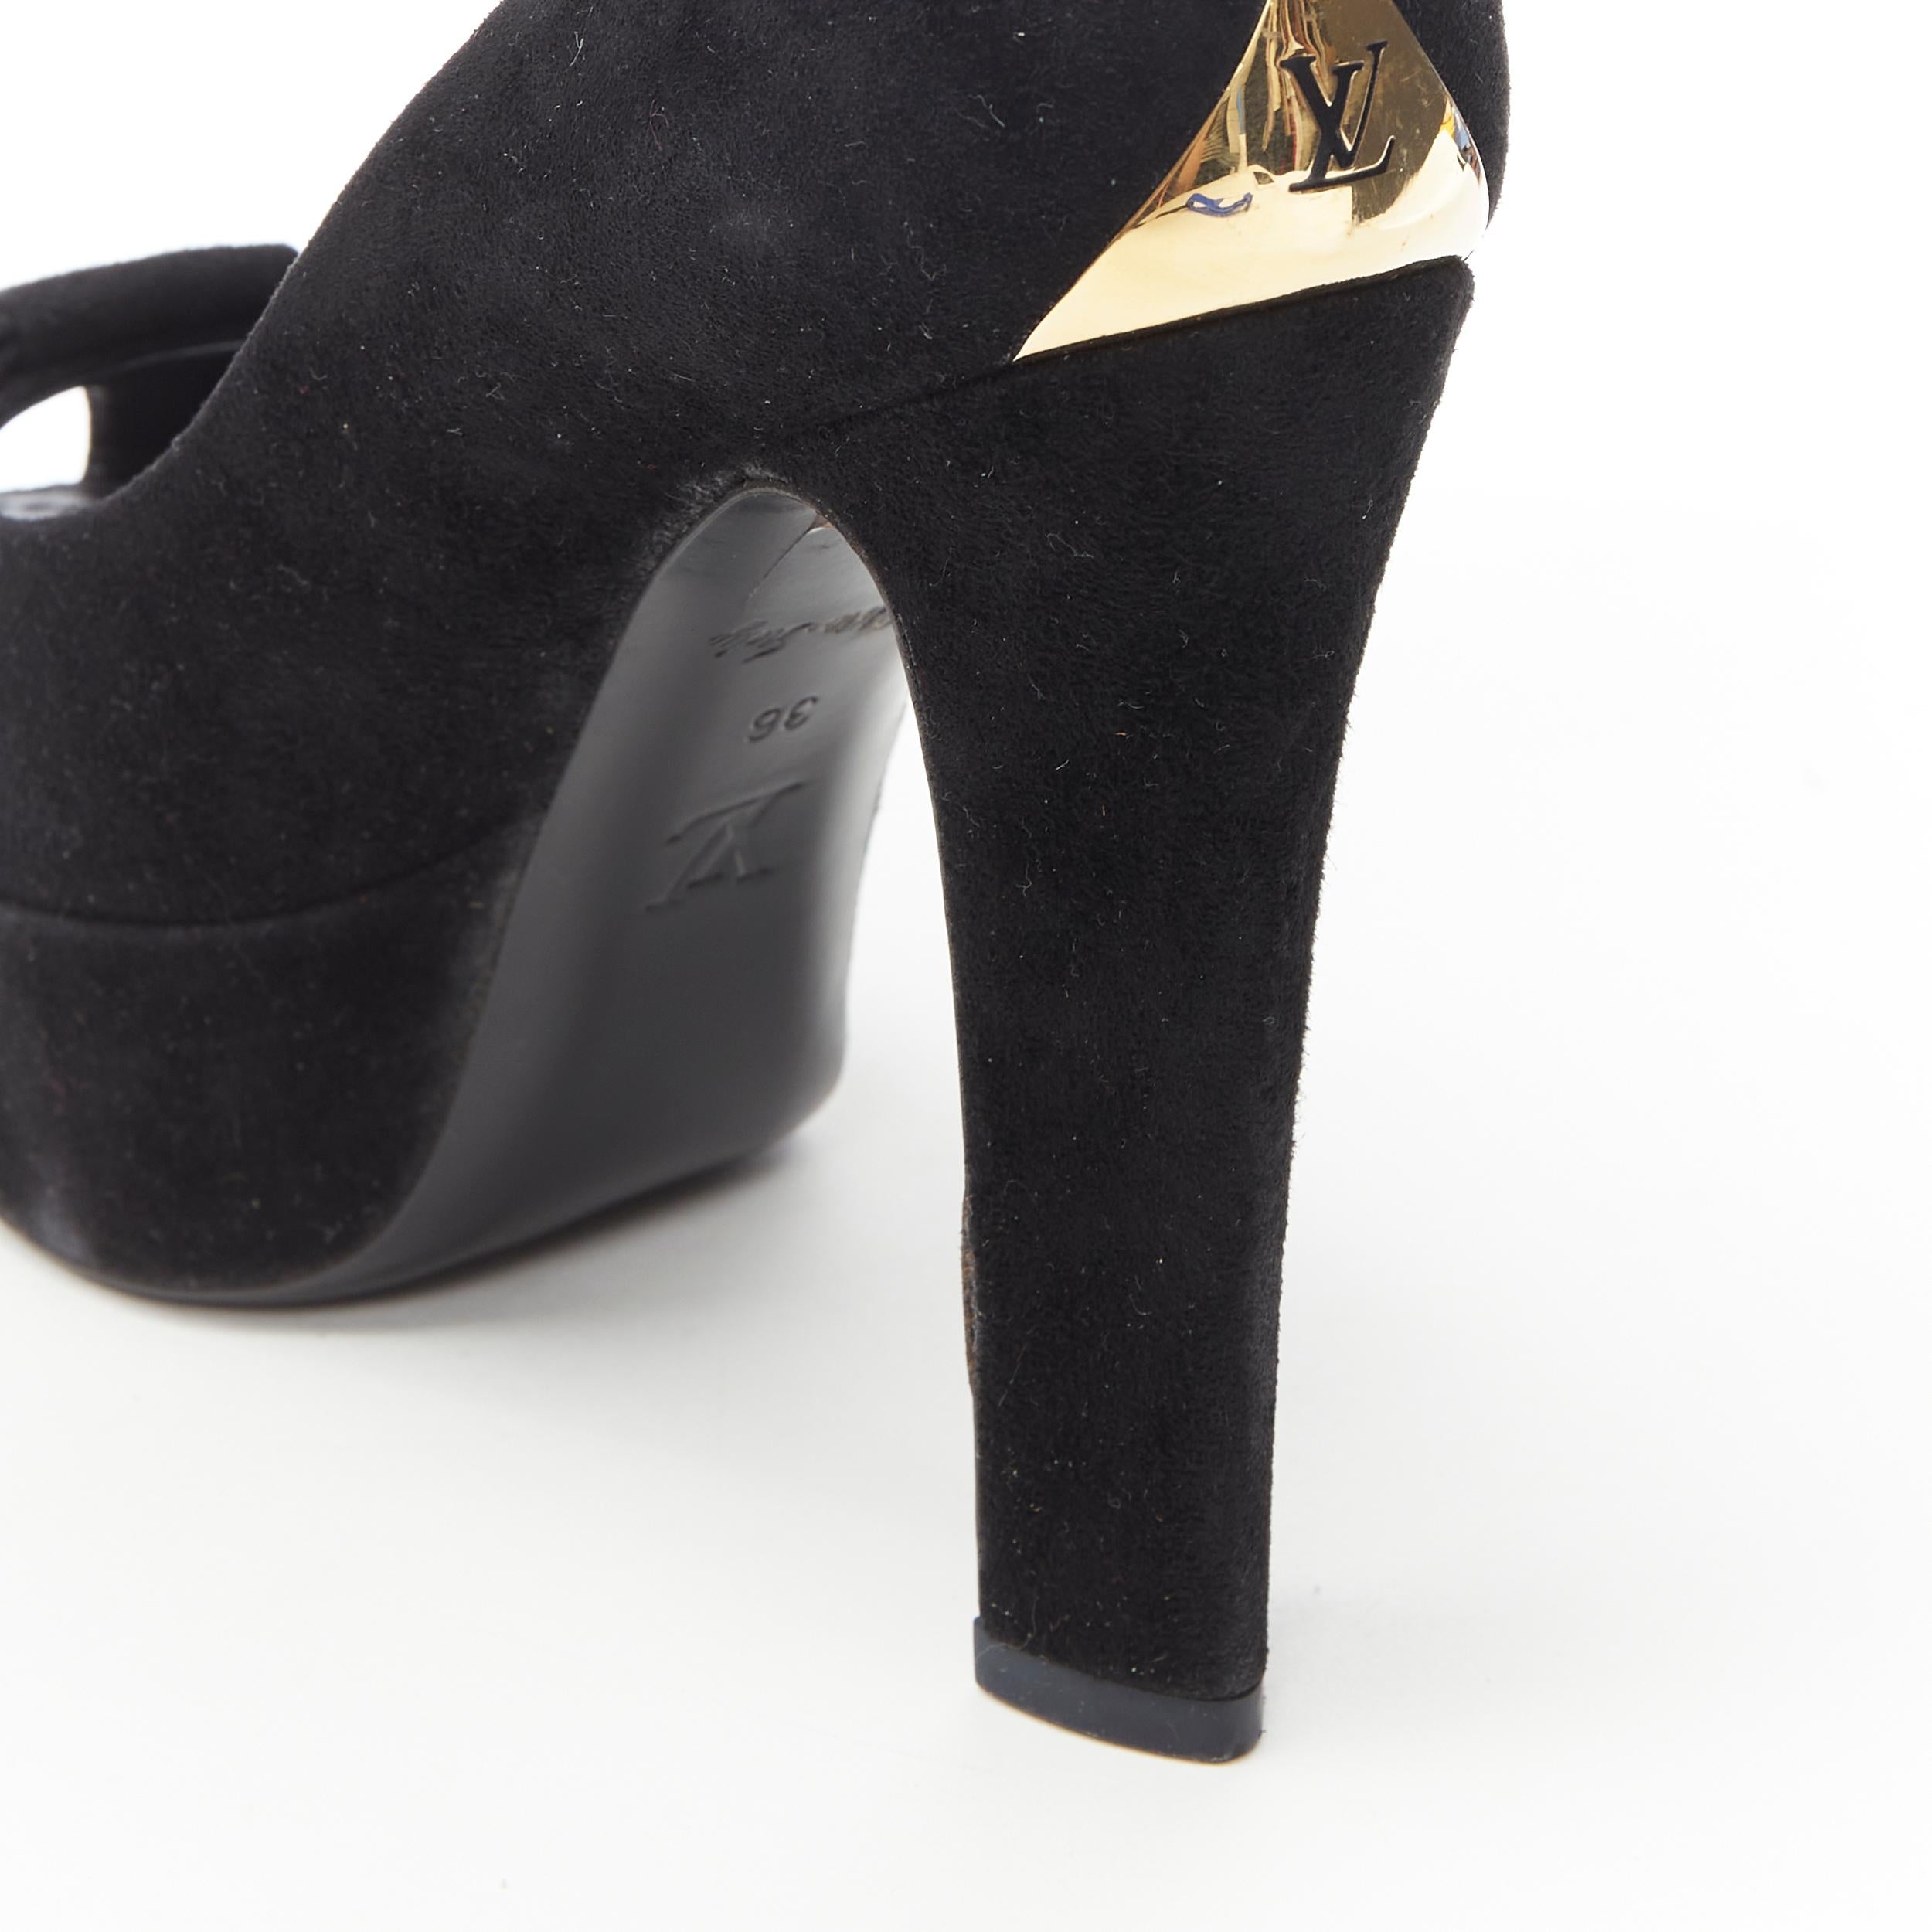 LOUIS VUITTON black suede bow peep toe platform gold LV metal plate pump EU36 
Reference: TGAS/B00223 
Brand: Louis Vuitton 
Material: Suede 
Color: Black 
Pattern: Solid 
Extra Detail: Suede upper. Large bow. Peep toe. Platform sole. Gold tone